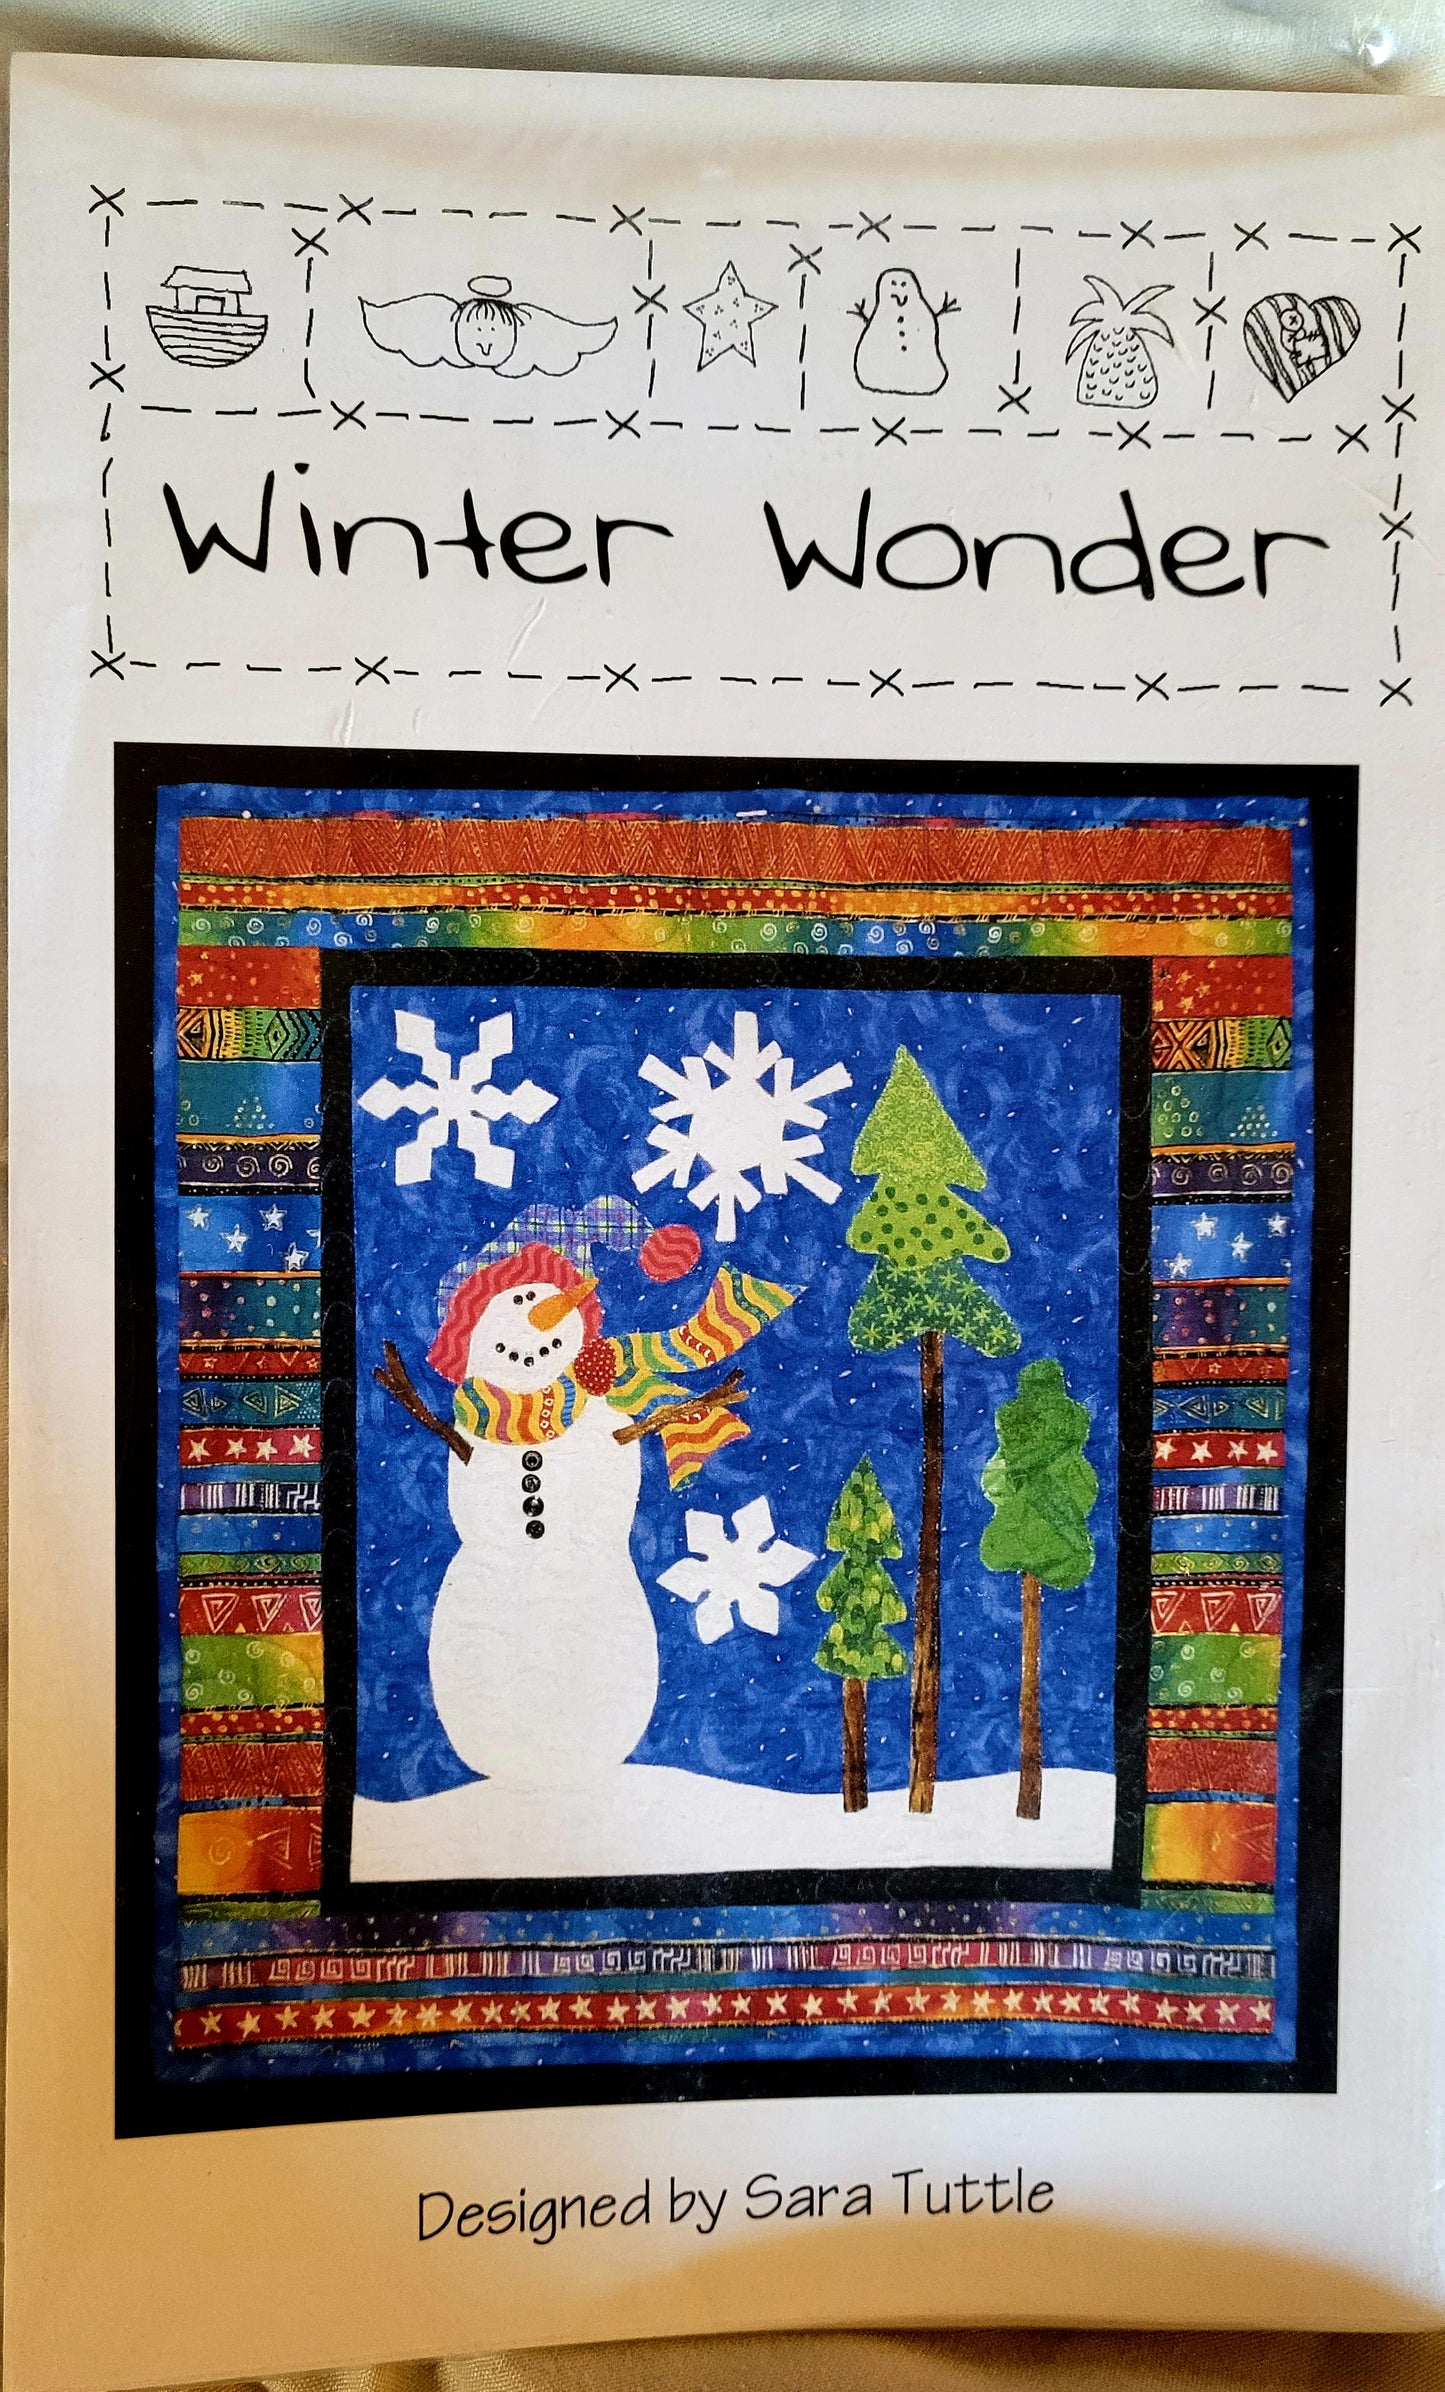 Winter Wonder "Snowman" Quilted Wall Hanging by Sara Tuttle (23" x 26") #QC181